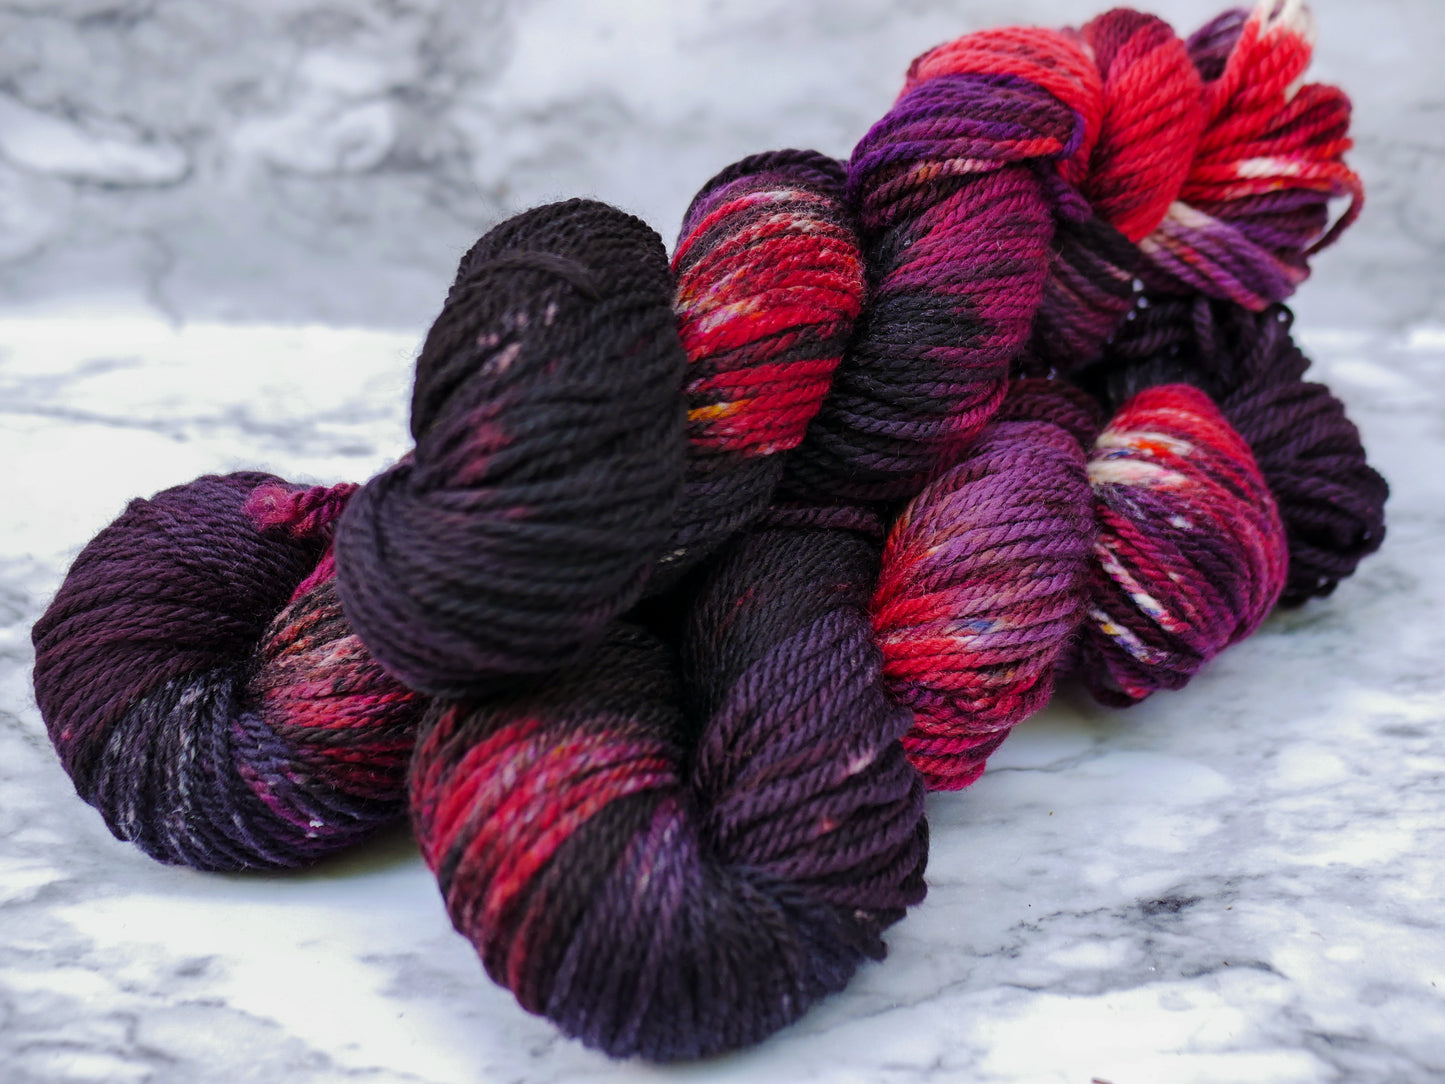 Handpainted 3 ply Worsted Weight Superwash Merino yarn - Dead, but Delicious